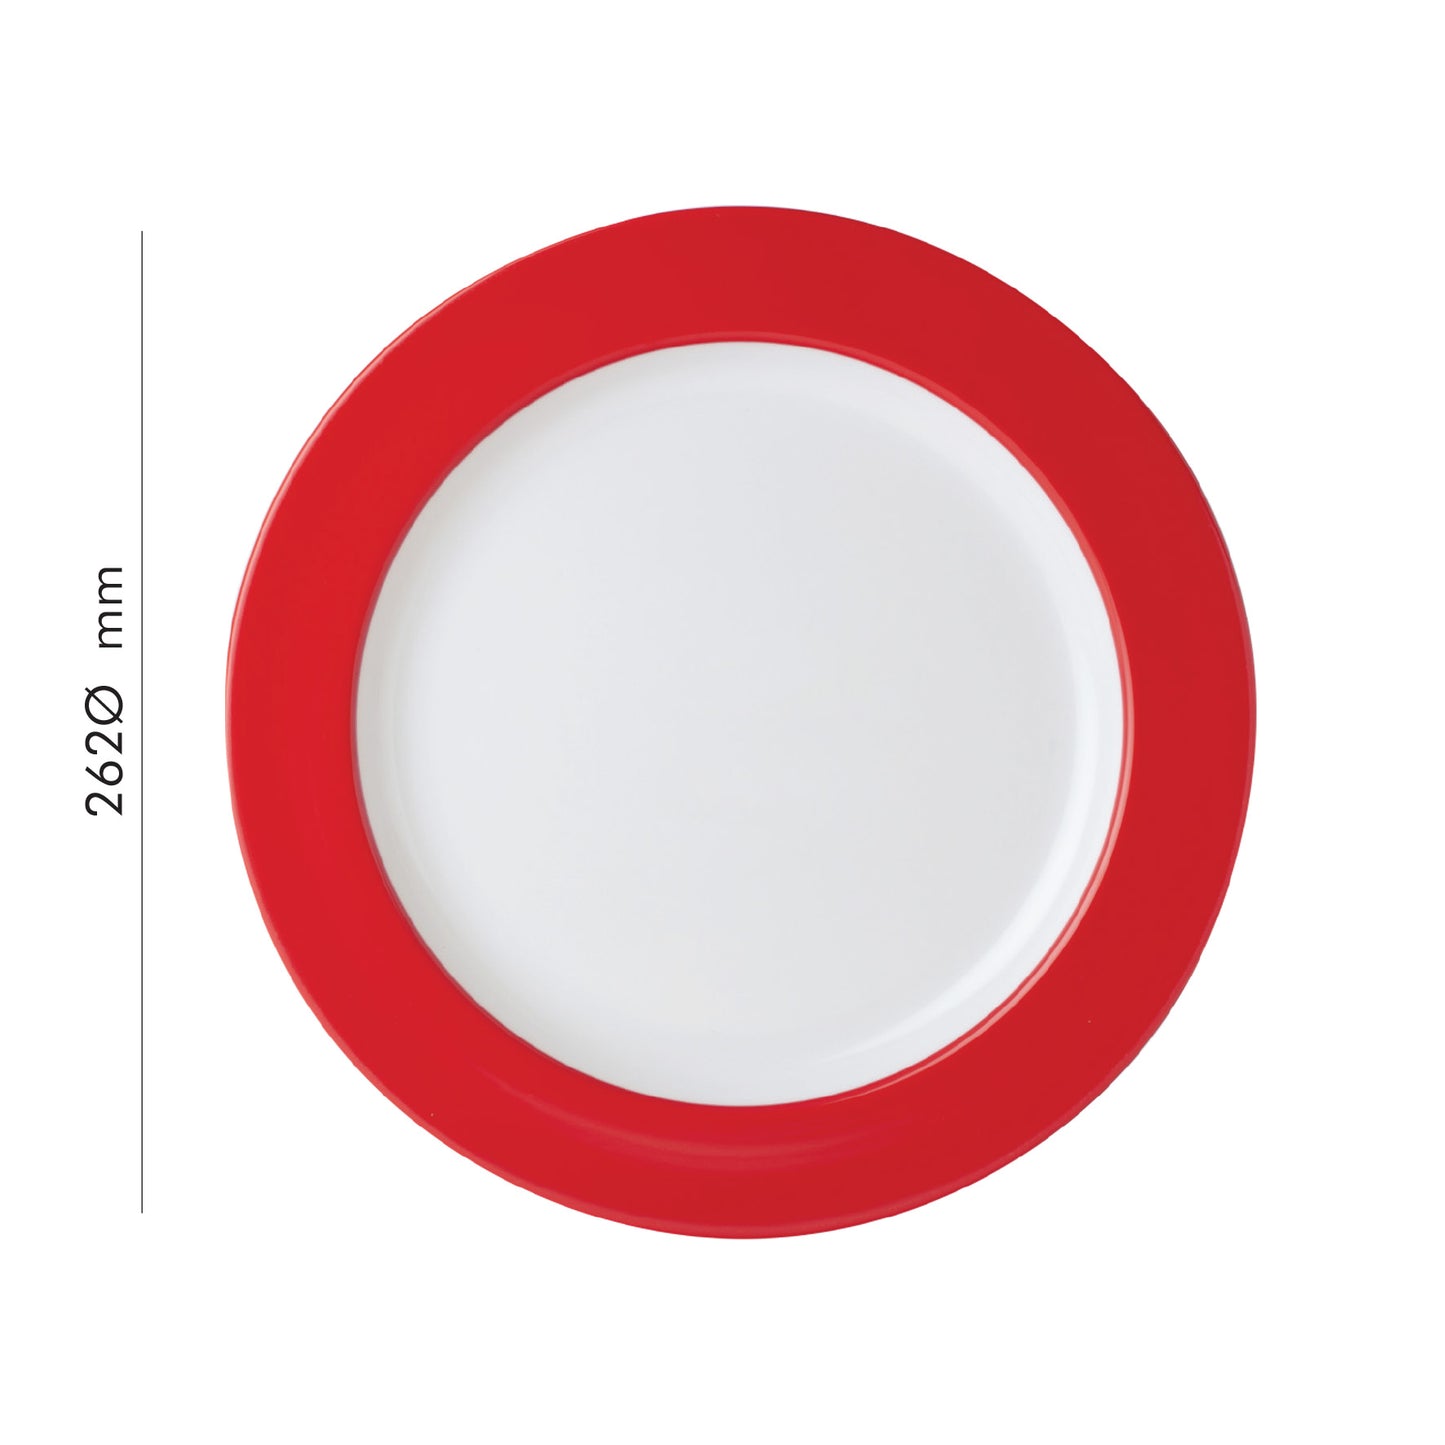 Dual Tone Wide Rim Round Dinner Plate 10.5" (Set of 1)